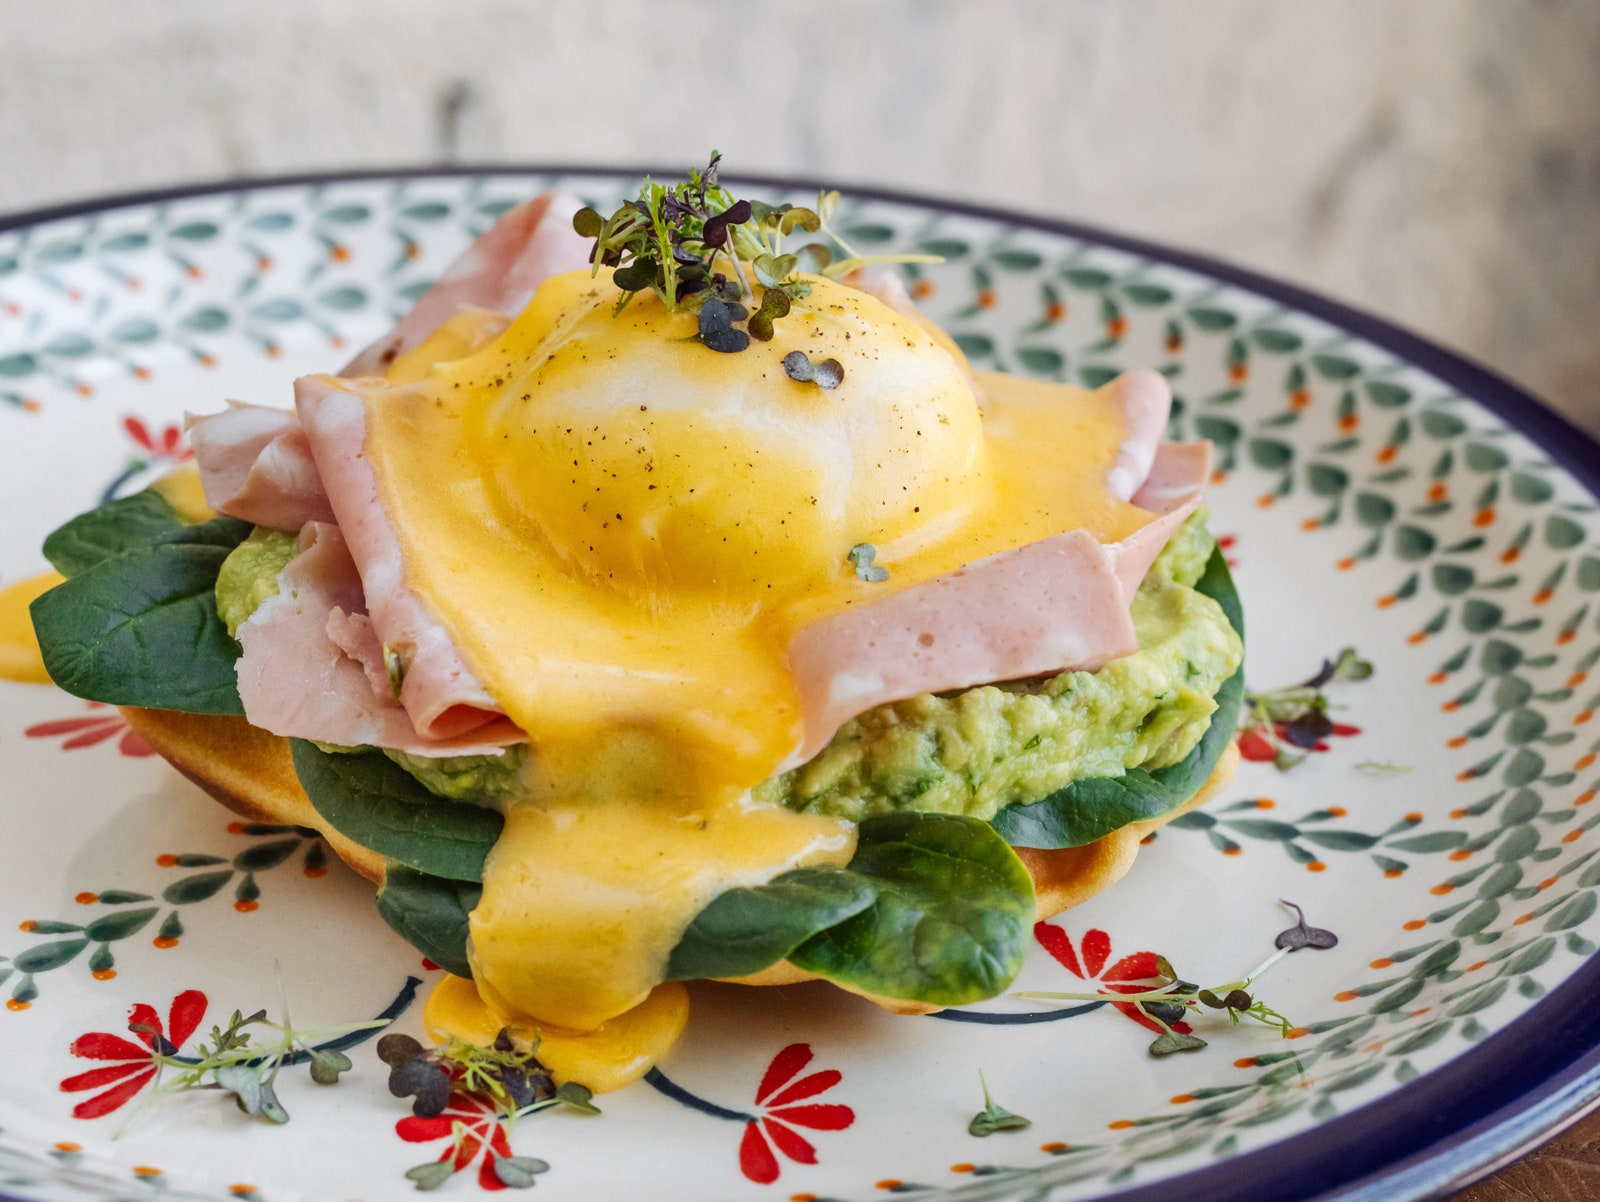 Learn how to cook delicious and beautiful breakfasts like in a restaurant, here are 6 recipes from chefs